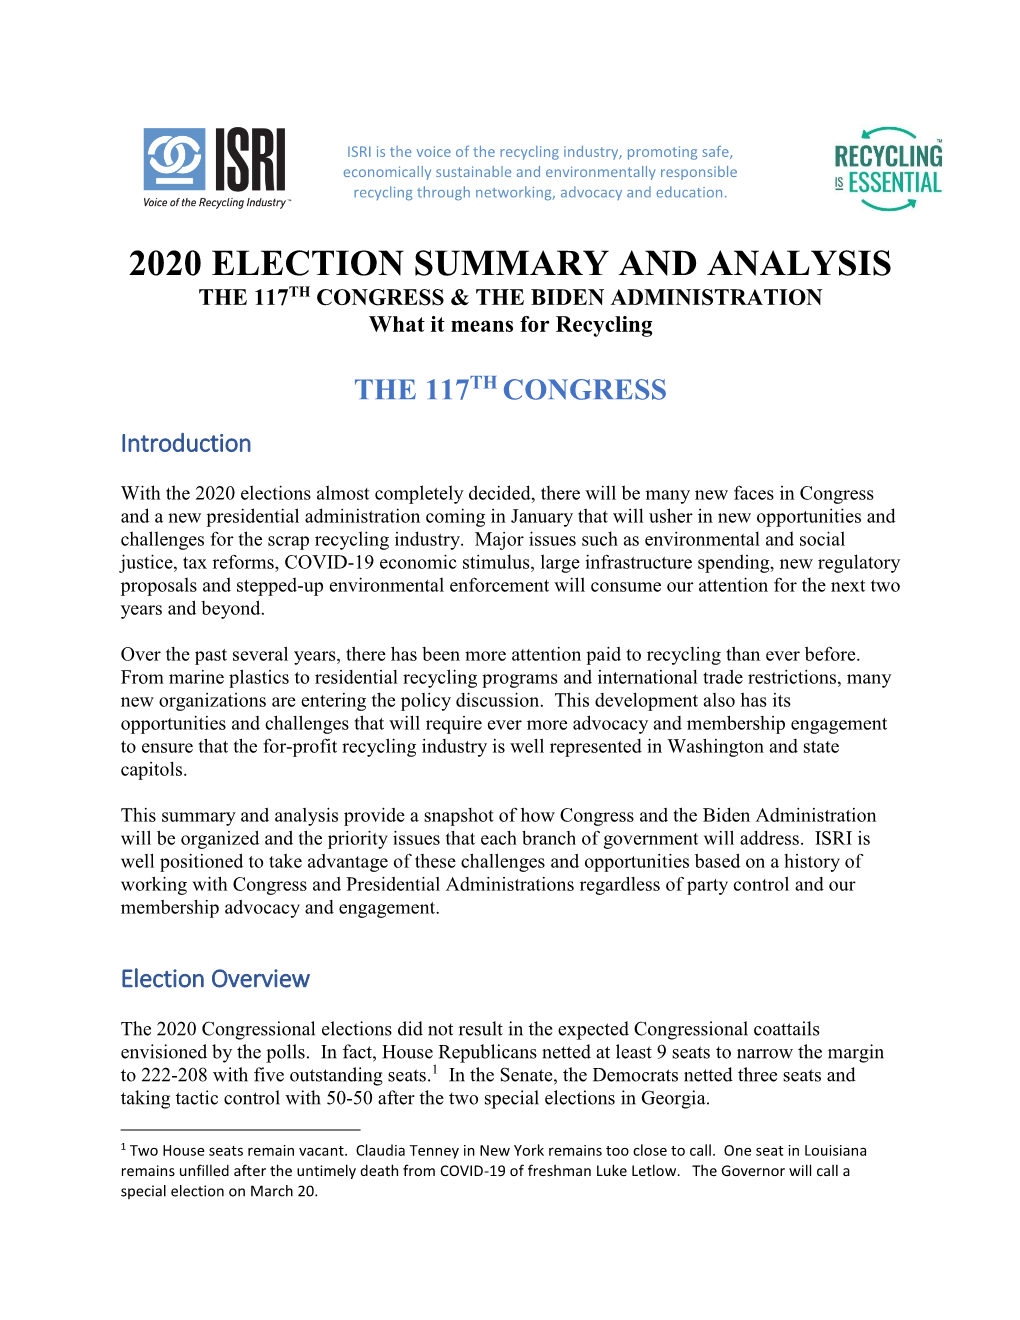 2020 ELECTION SUMMARY and ANALYSIS the 117TH CONGRESS & the BIDEN ADMINISTRATION What It Means for Recycling